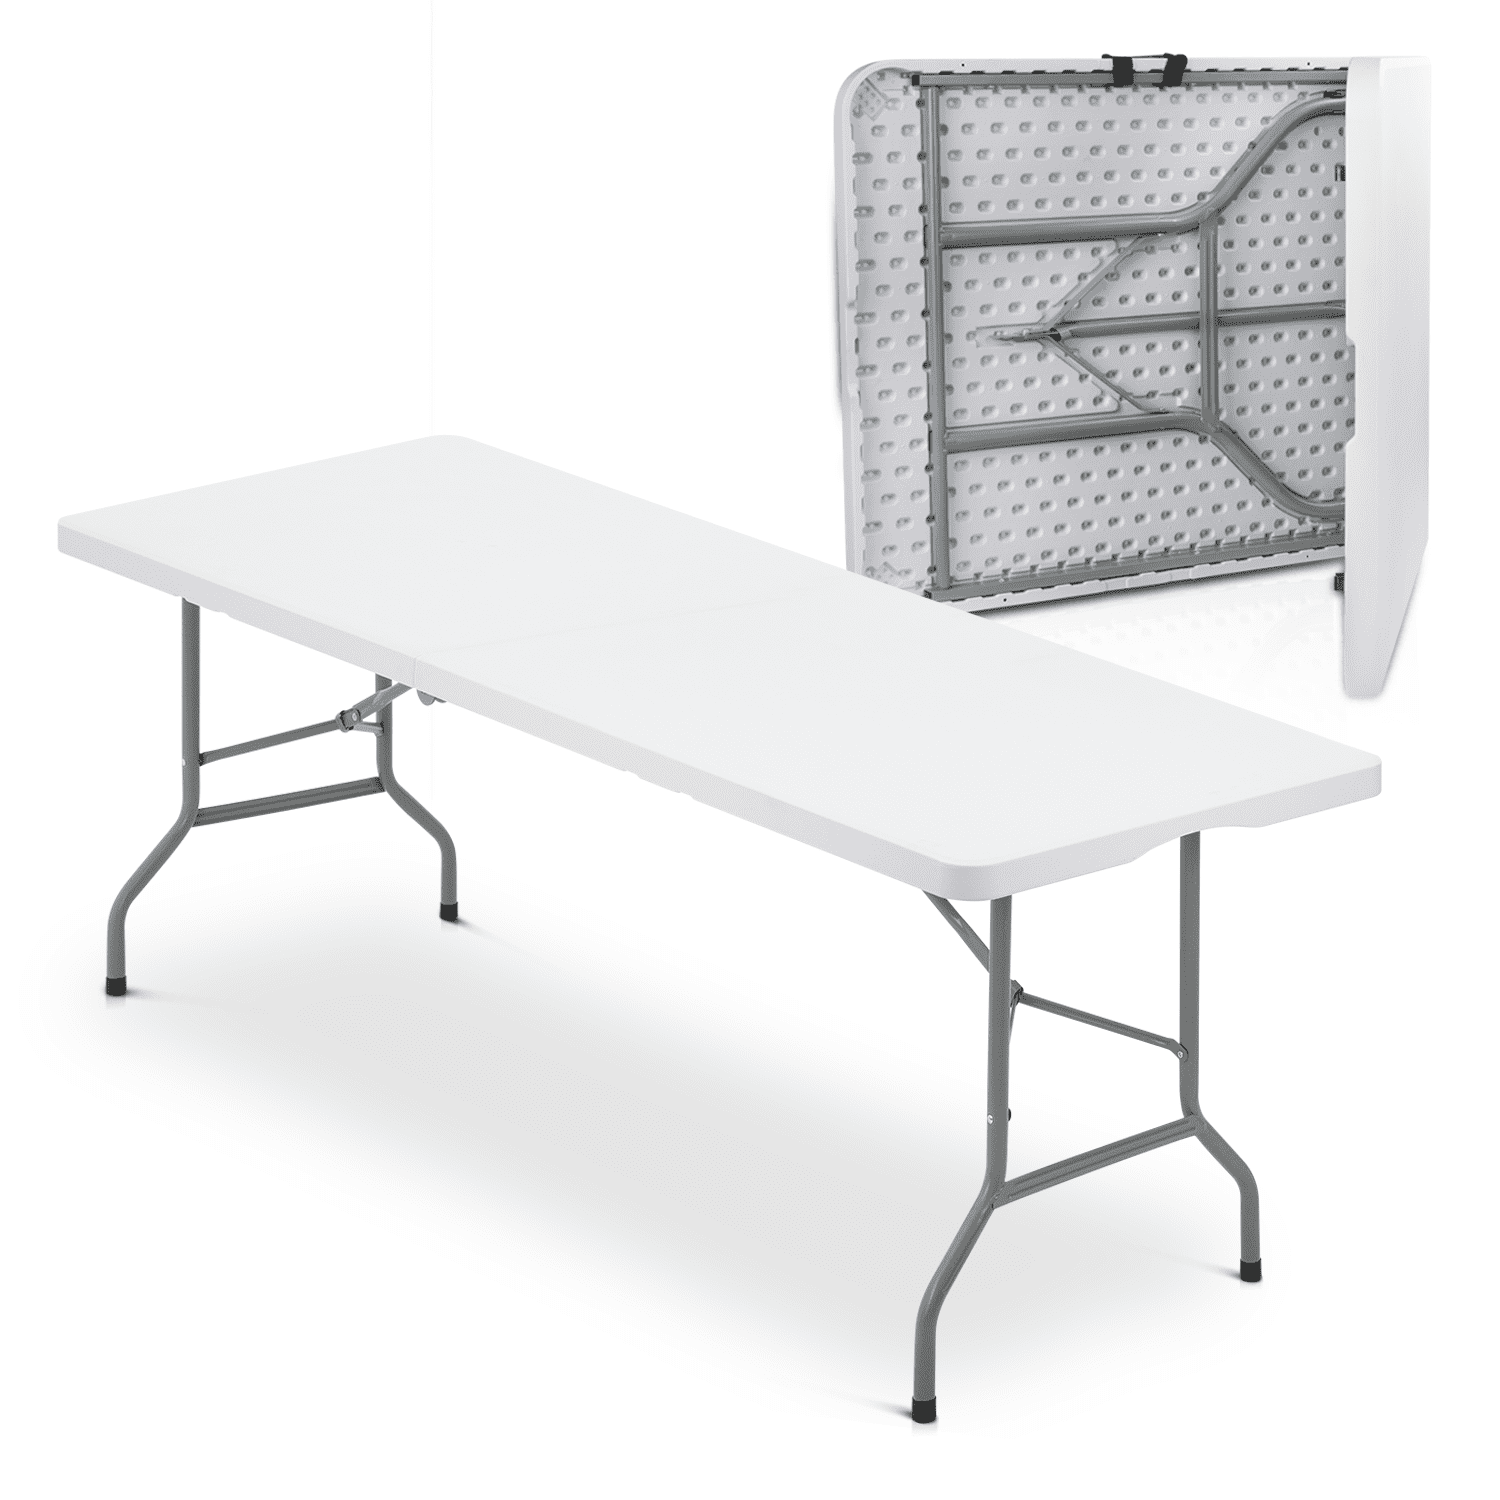 MoNiBloom 8Ft Folding Heavy Duty Table, Indoor Outdoor Portable Rectangle  Plastic Picnic Desk with Steel Frame and Handle, White 